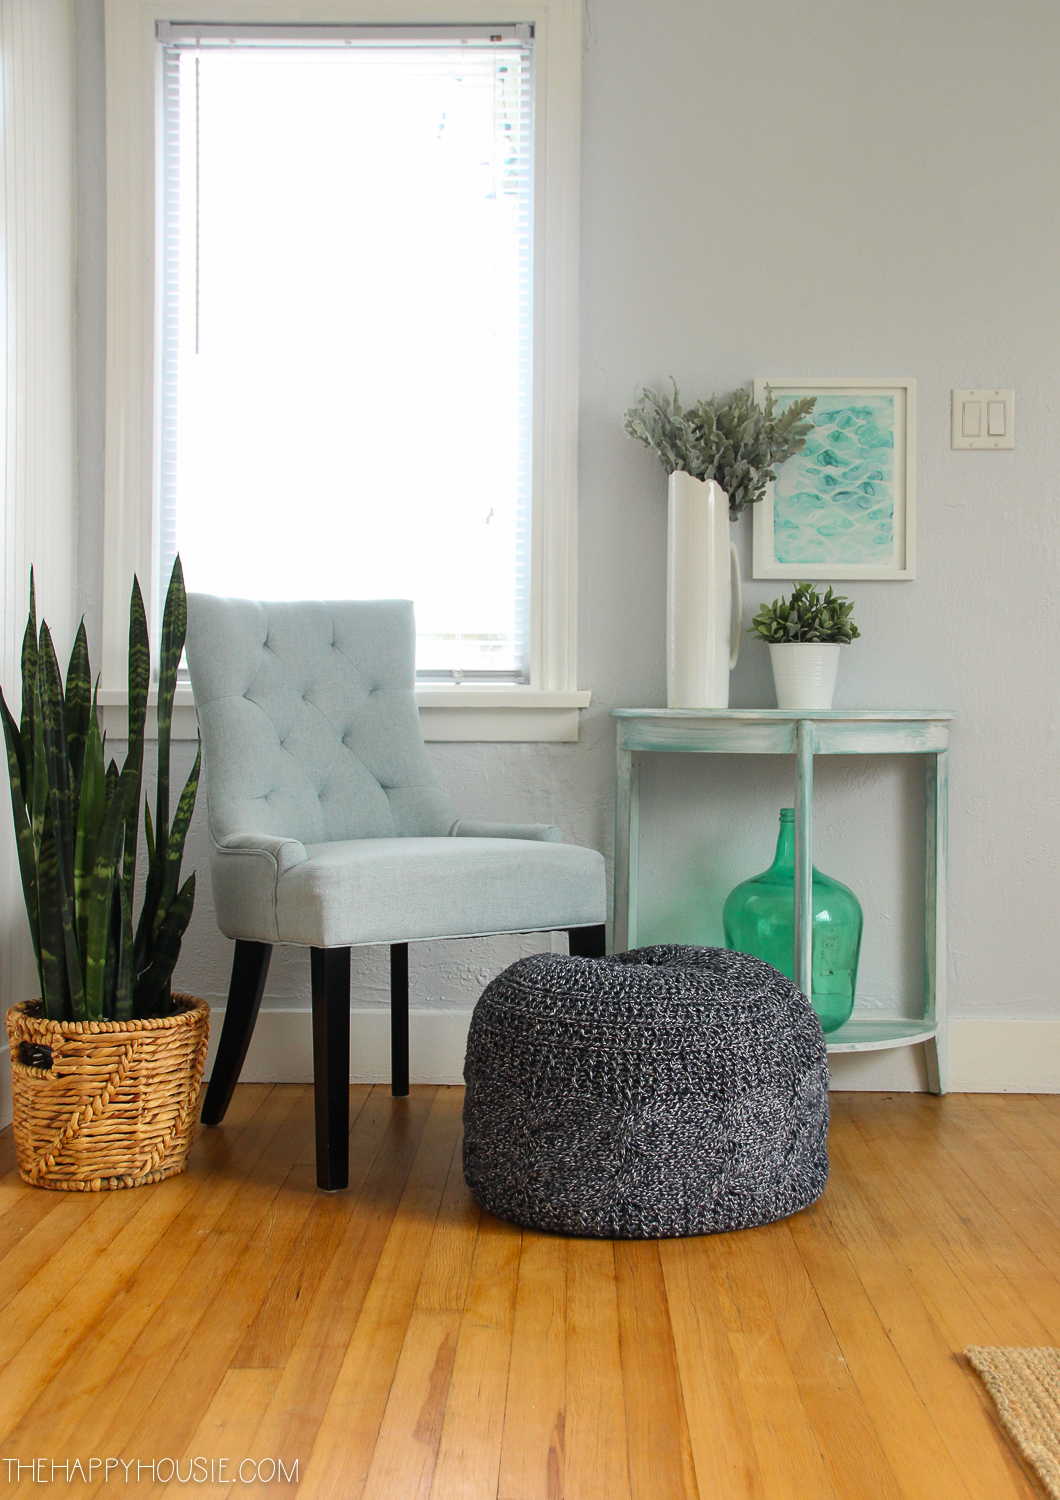 There is a pouf in front of a tufted blue chair.